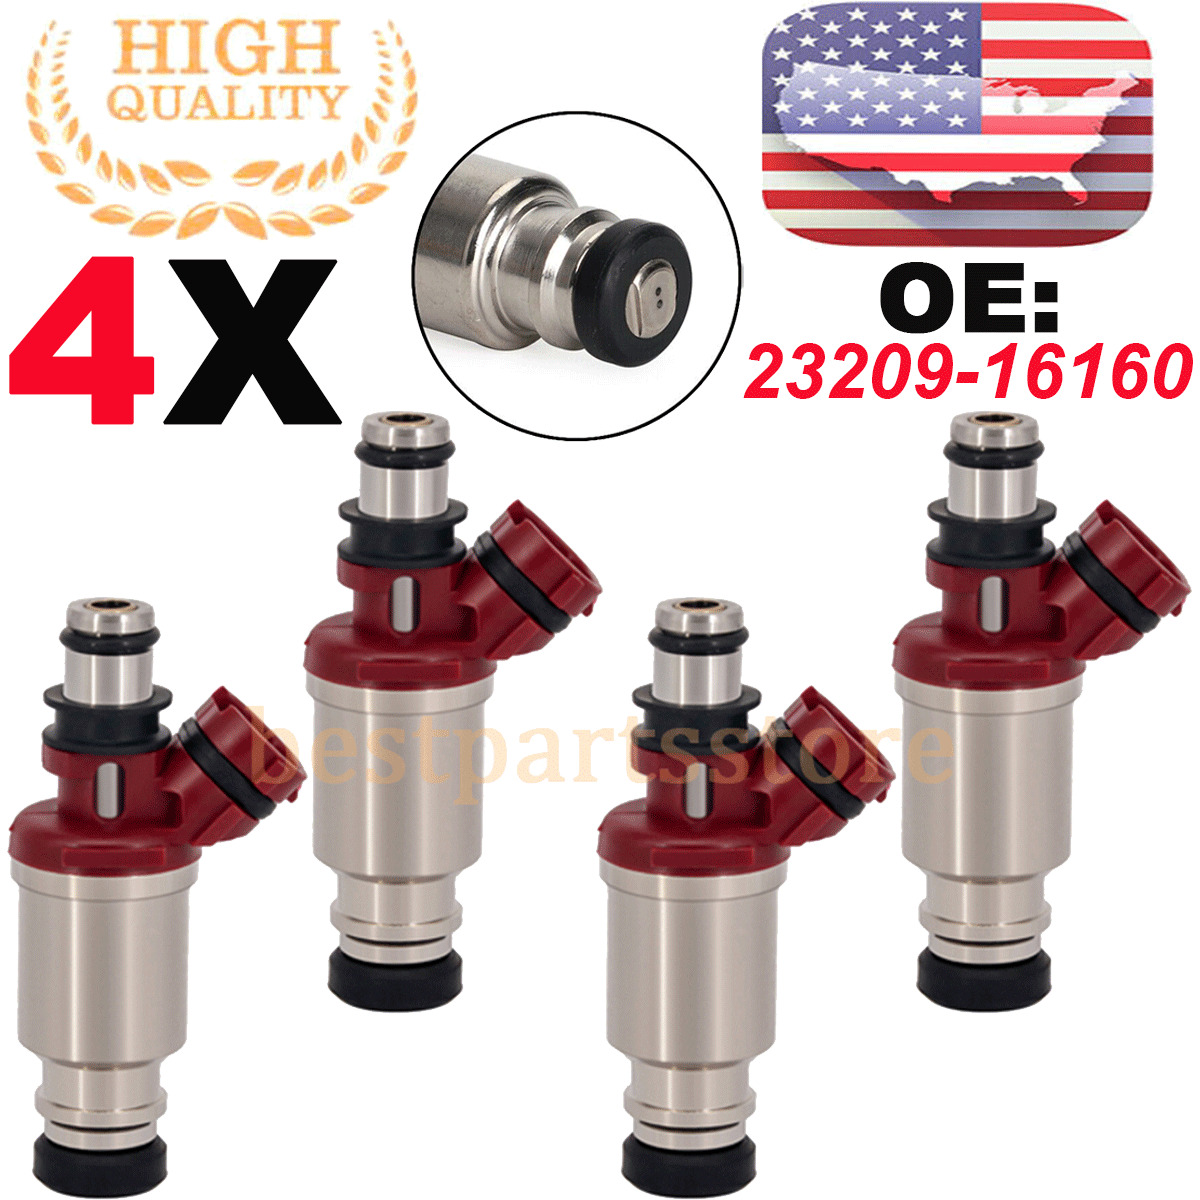 4* Fuel Injector For GEO PRIZM/TOYOTA COROLLA 1.8L 1993-97 23250-16160 842-12150